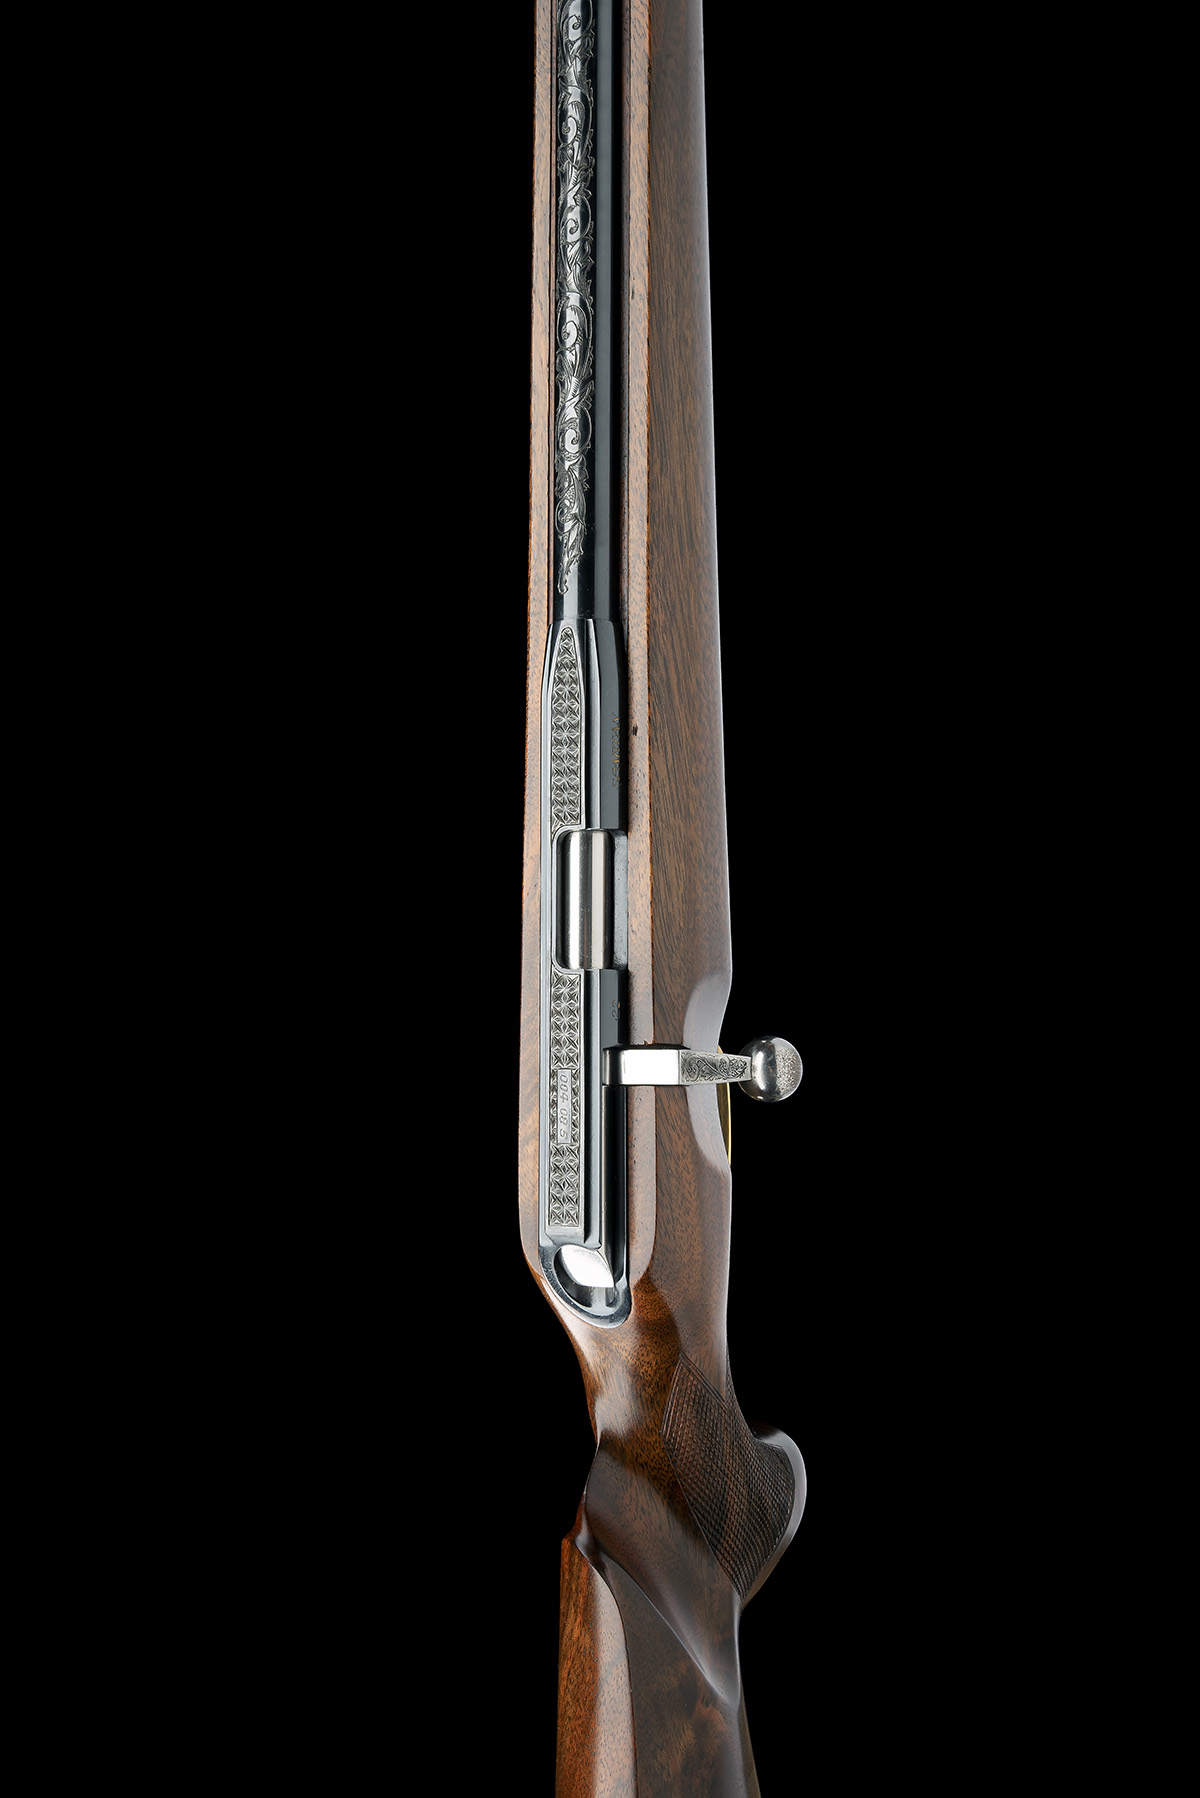 A CASED RARE ISP SPARTAN BOLT-ACTION ENGRAVED CUSTOM PNEUMATIC AIR-RIFLE, serial no. 004 085, - Image 6 of 11